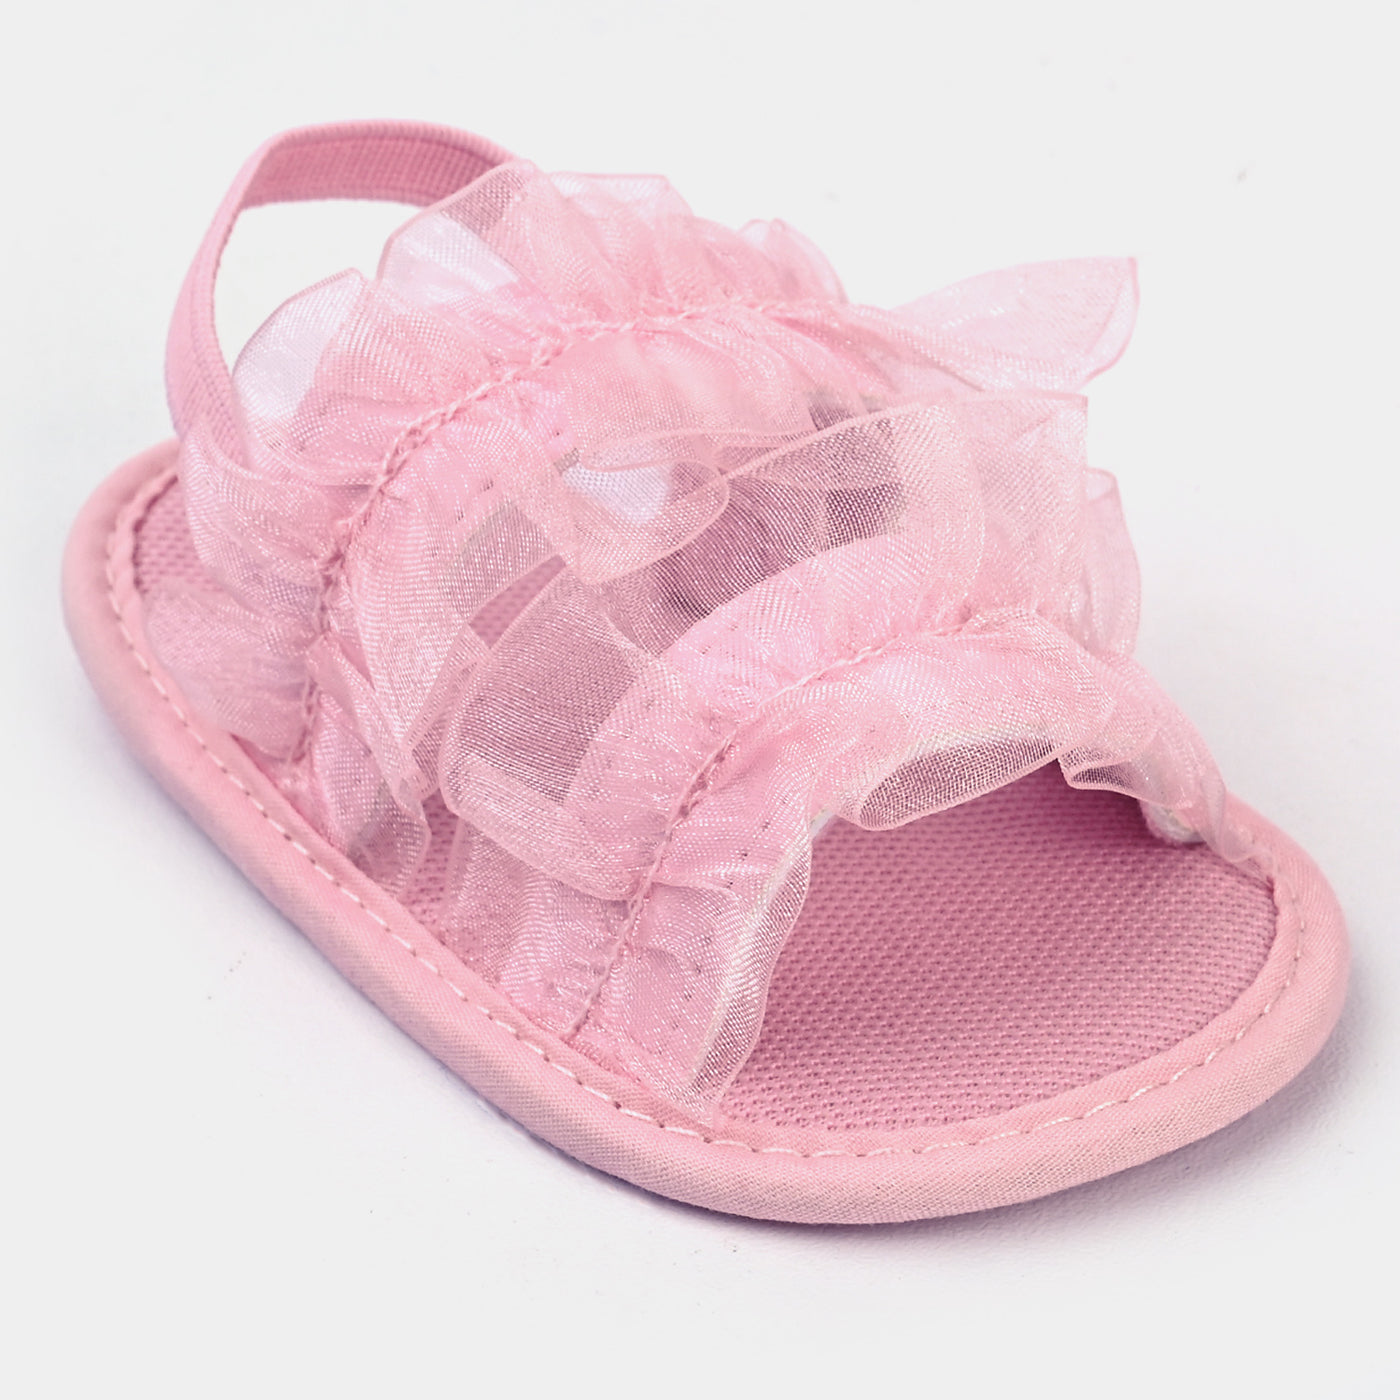 Baby Girls Shoes C-679-Pink